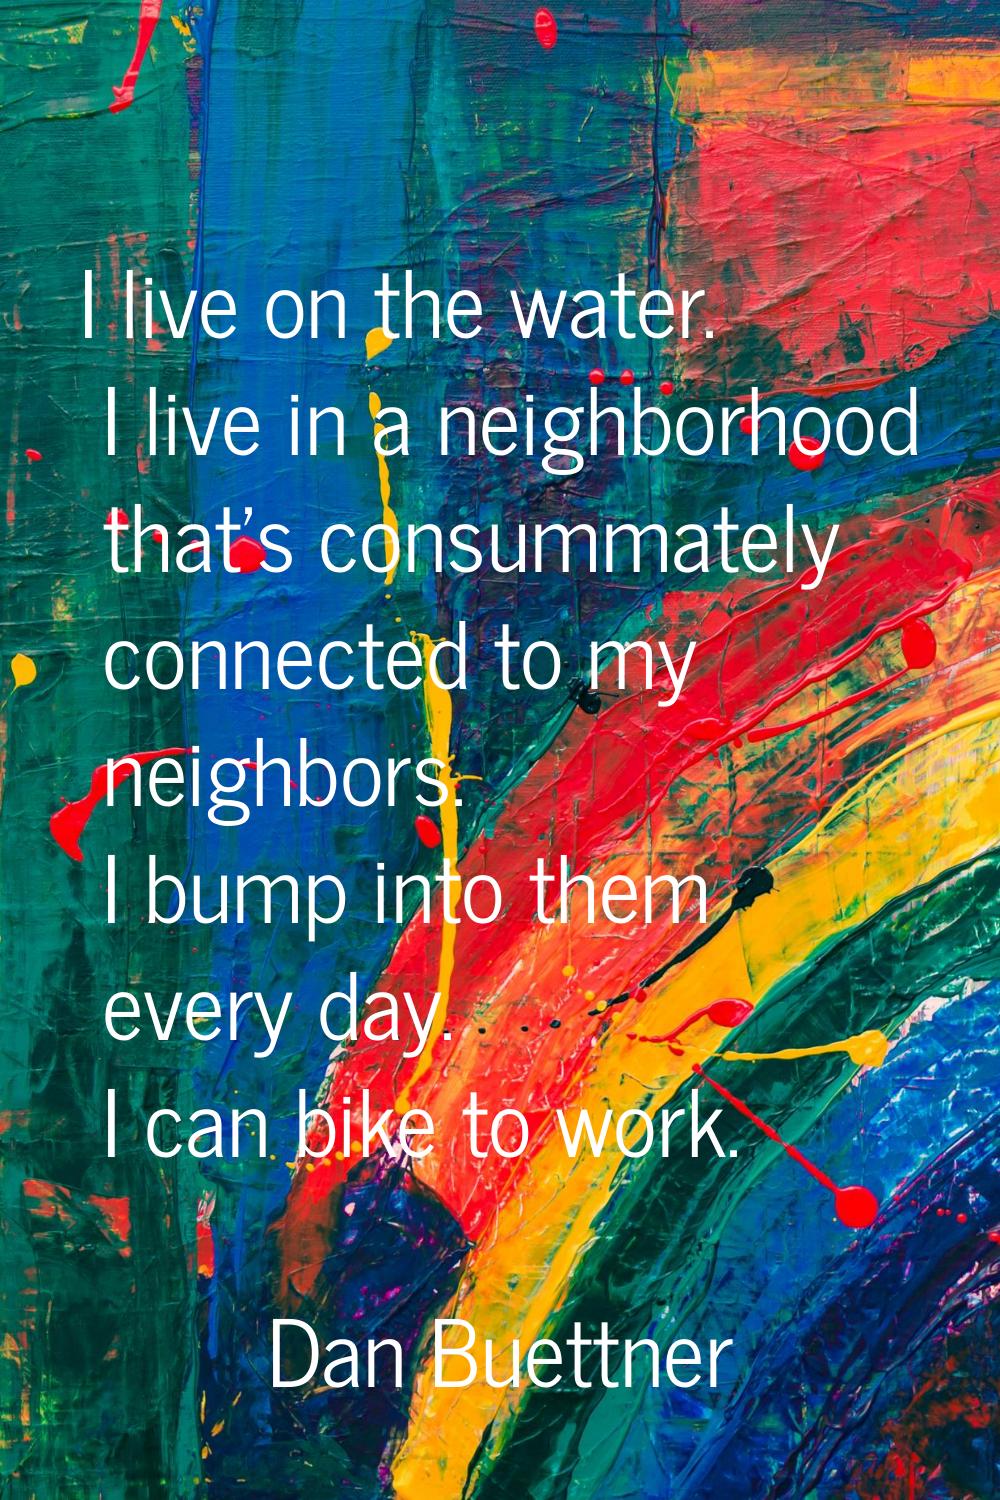 I live on the water. I live in a neighborhood that's consummately connected to my neighbors. I bump